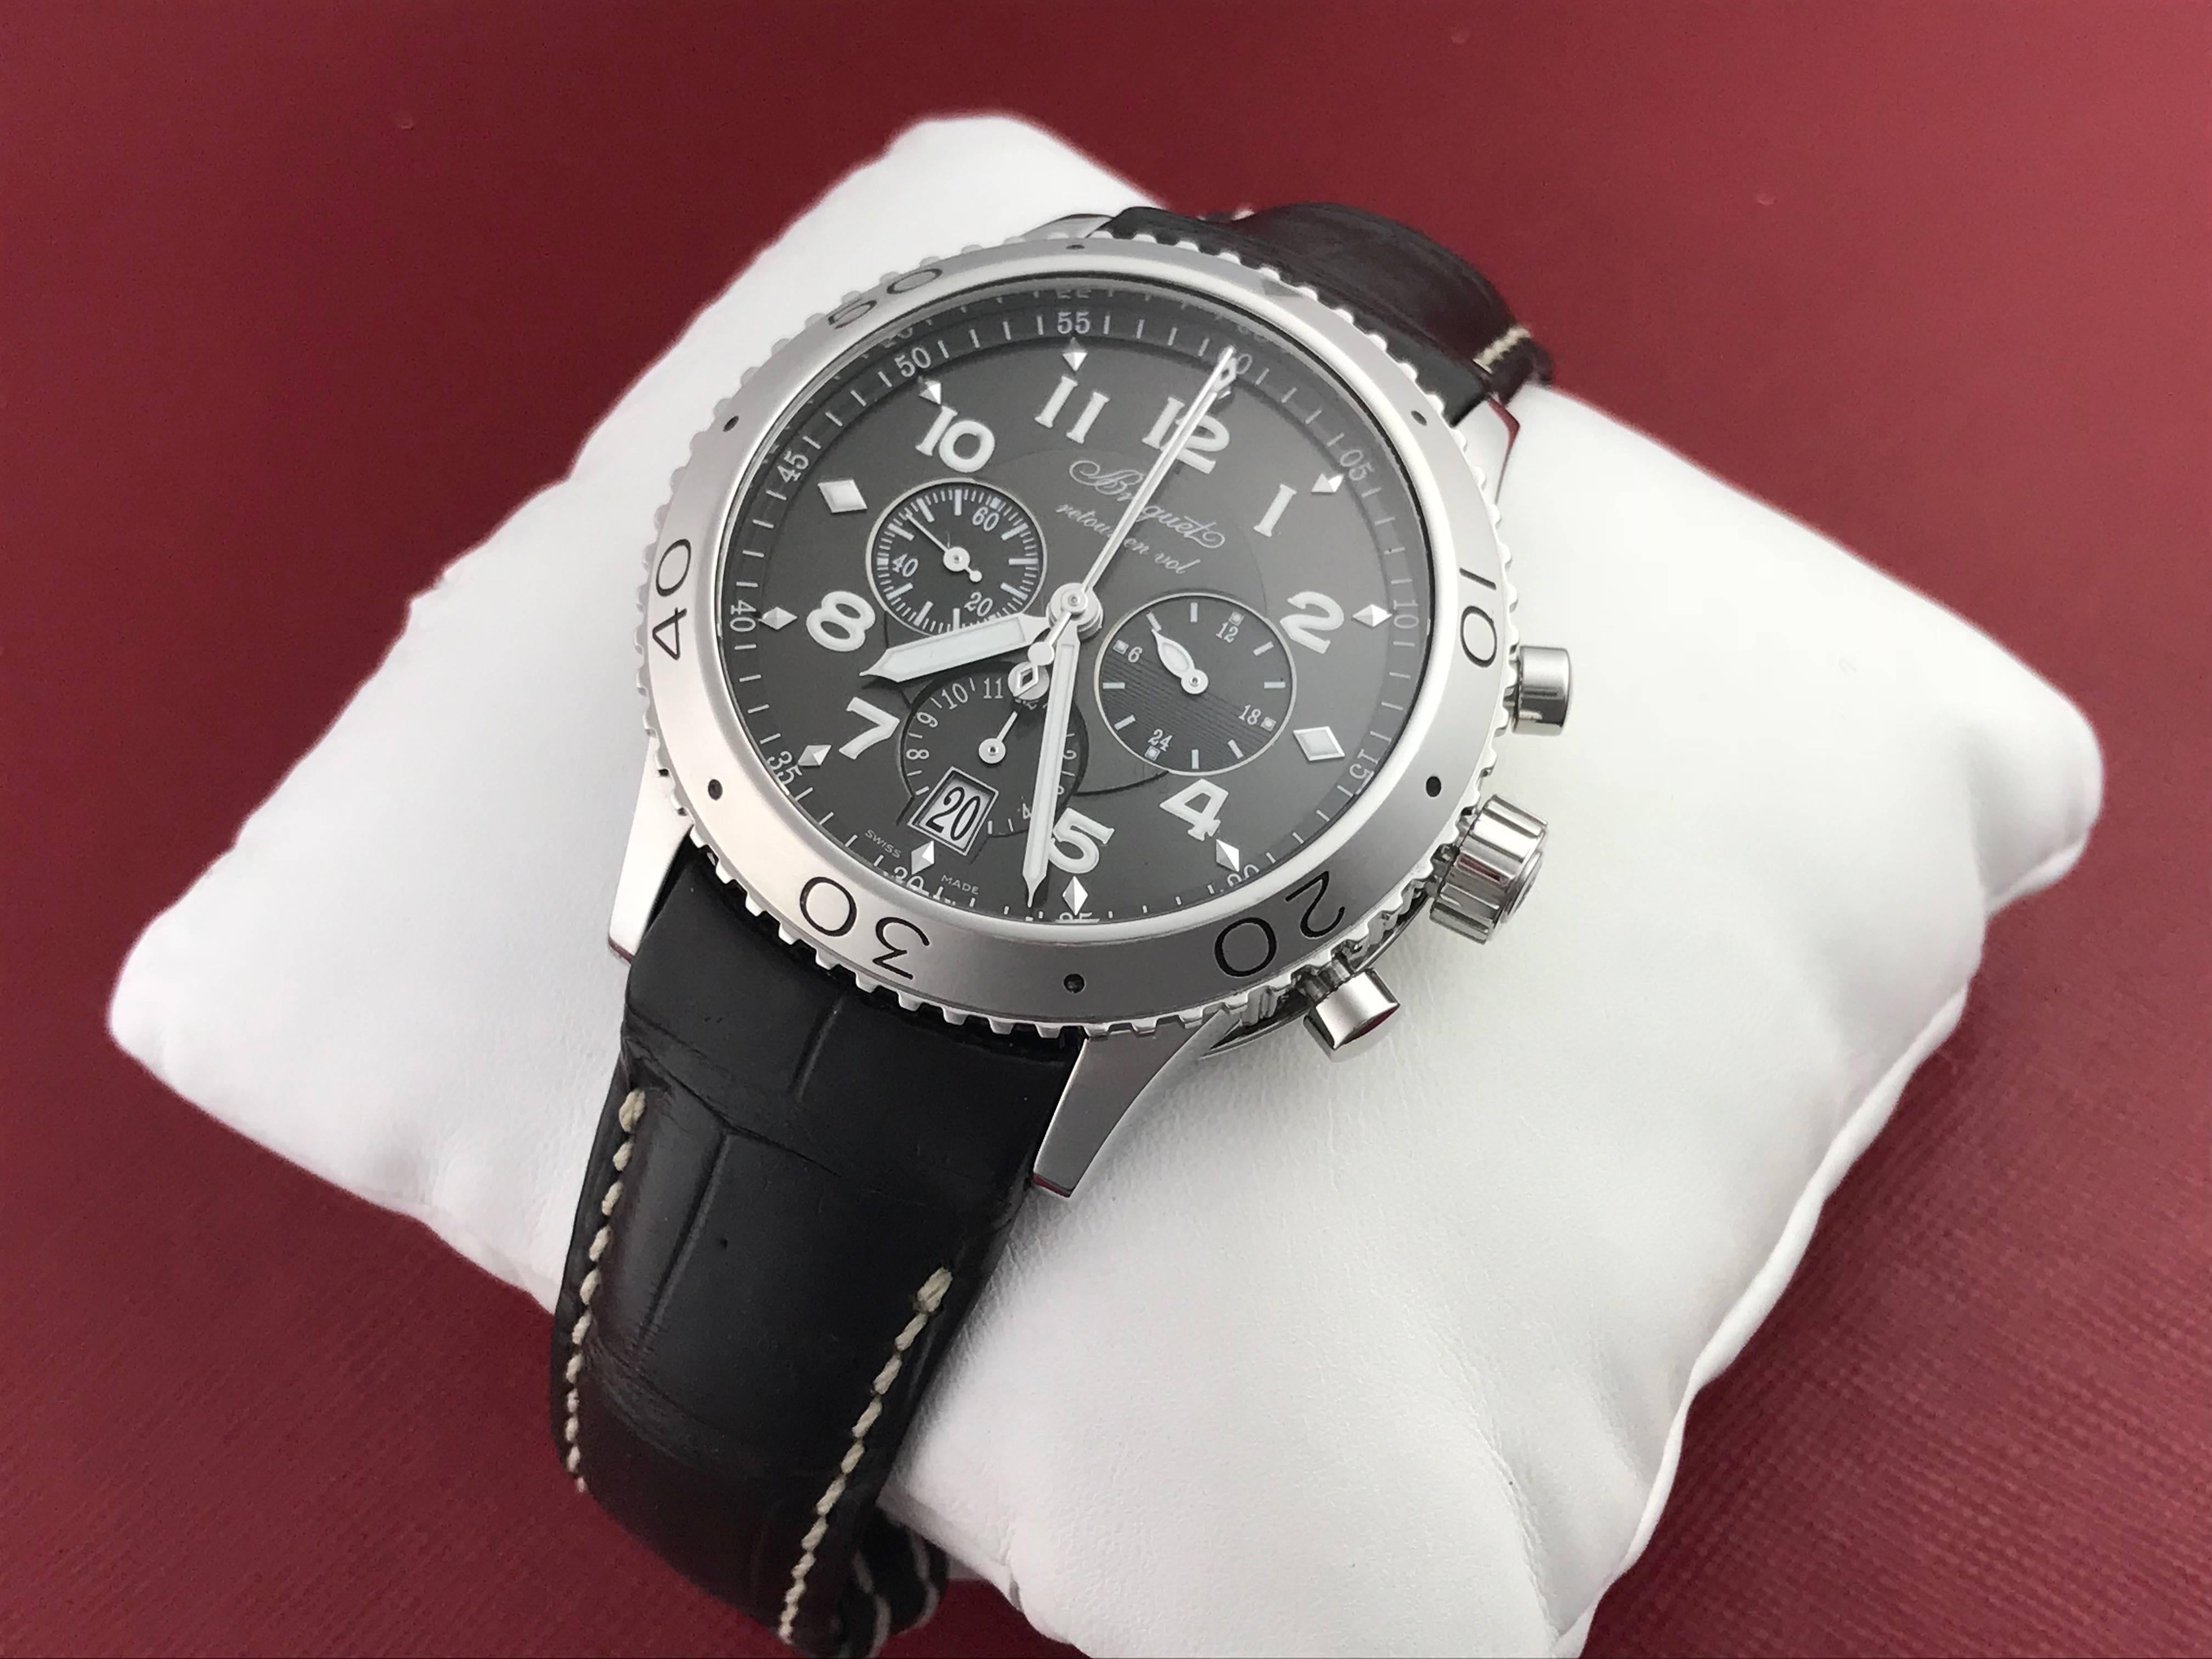 Contemporary Breguet Stainless Steel Chronograph Type XXI Flyback Automatic Wristwatch 